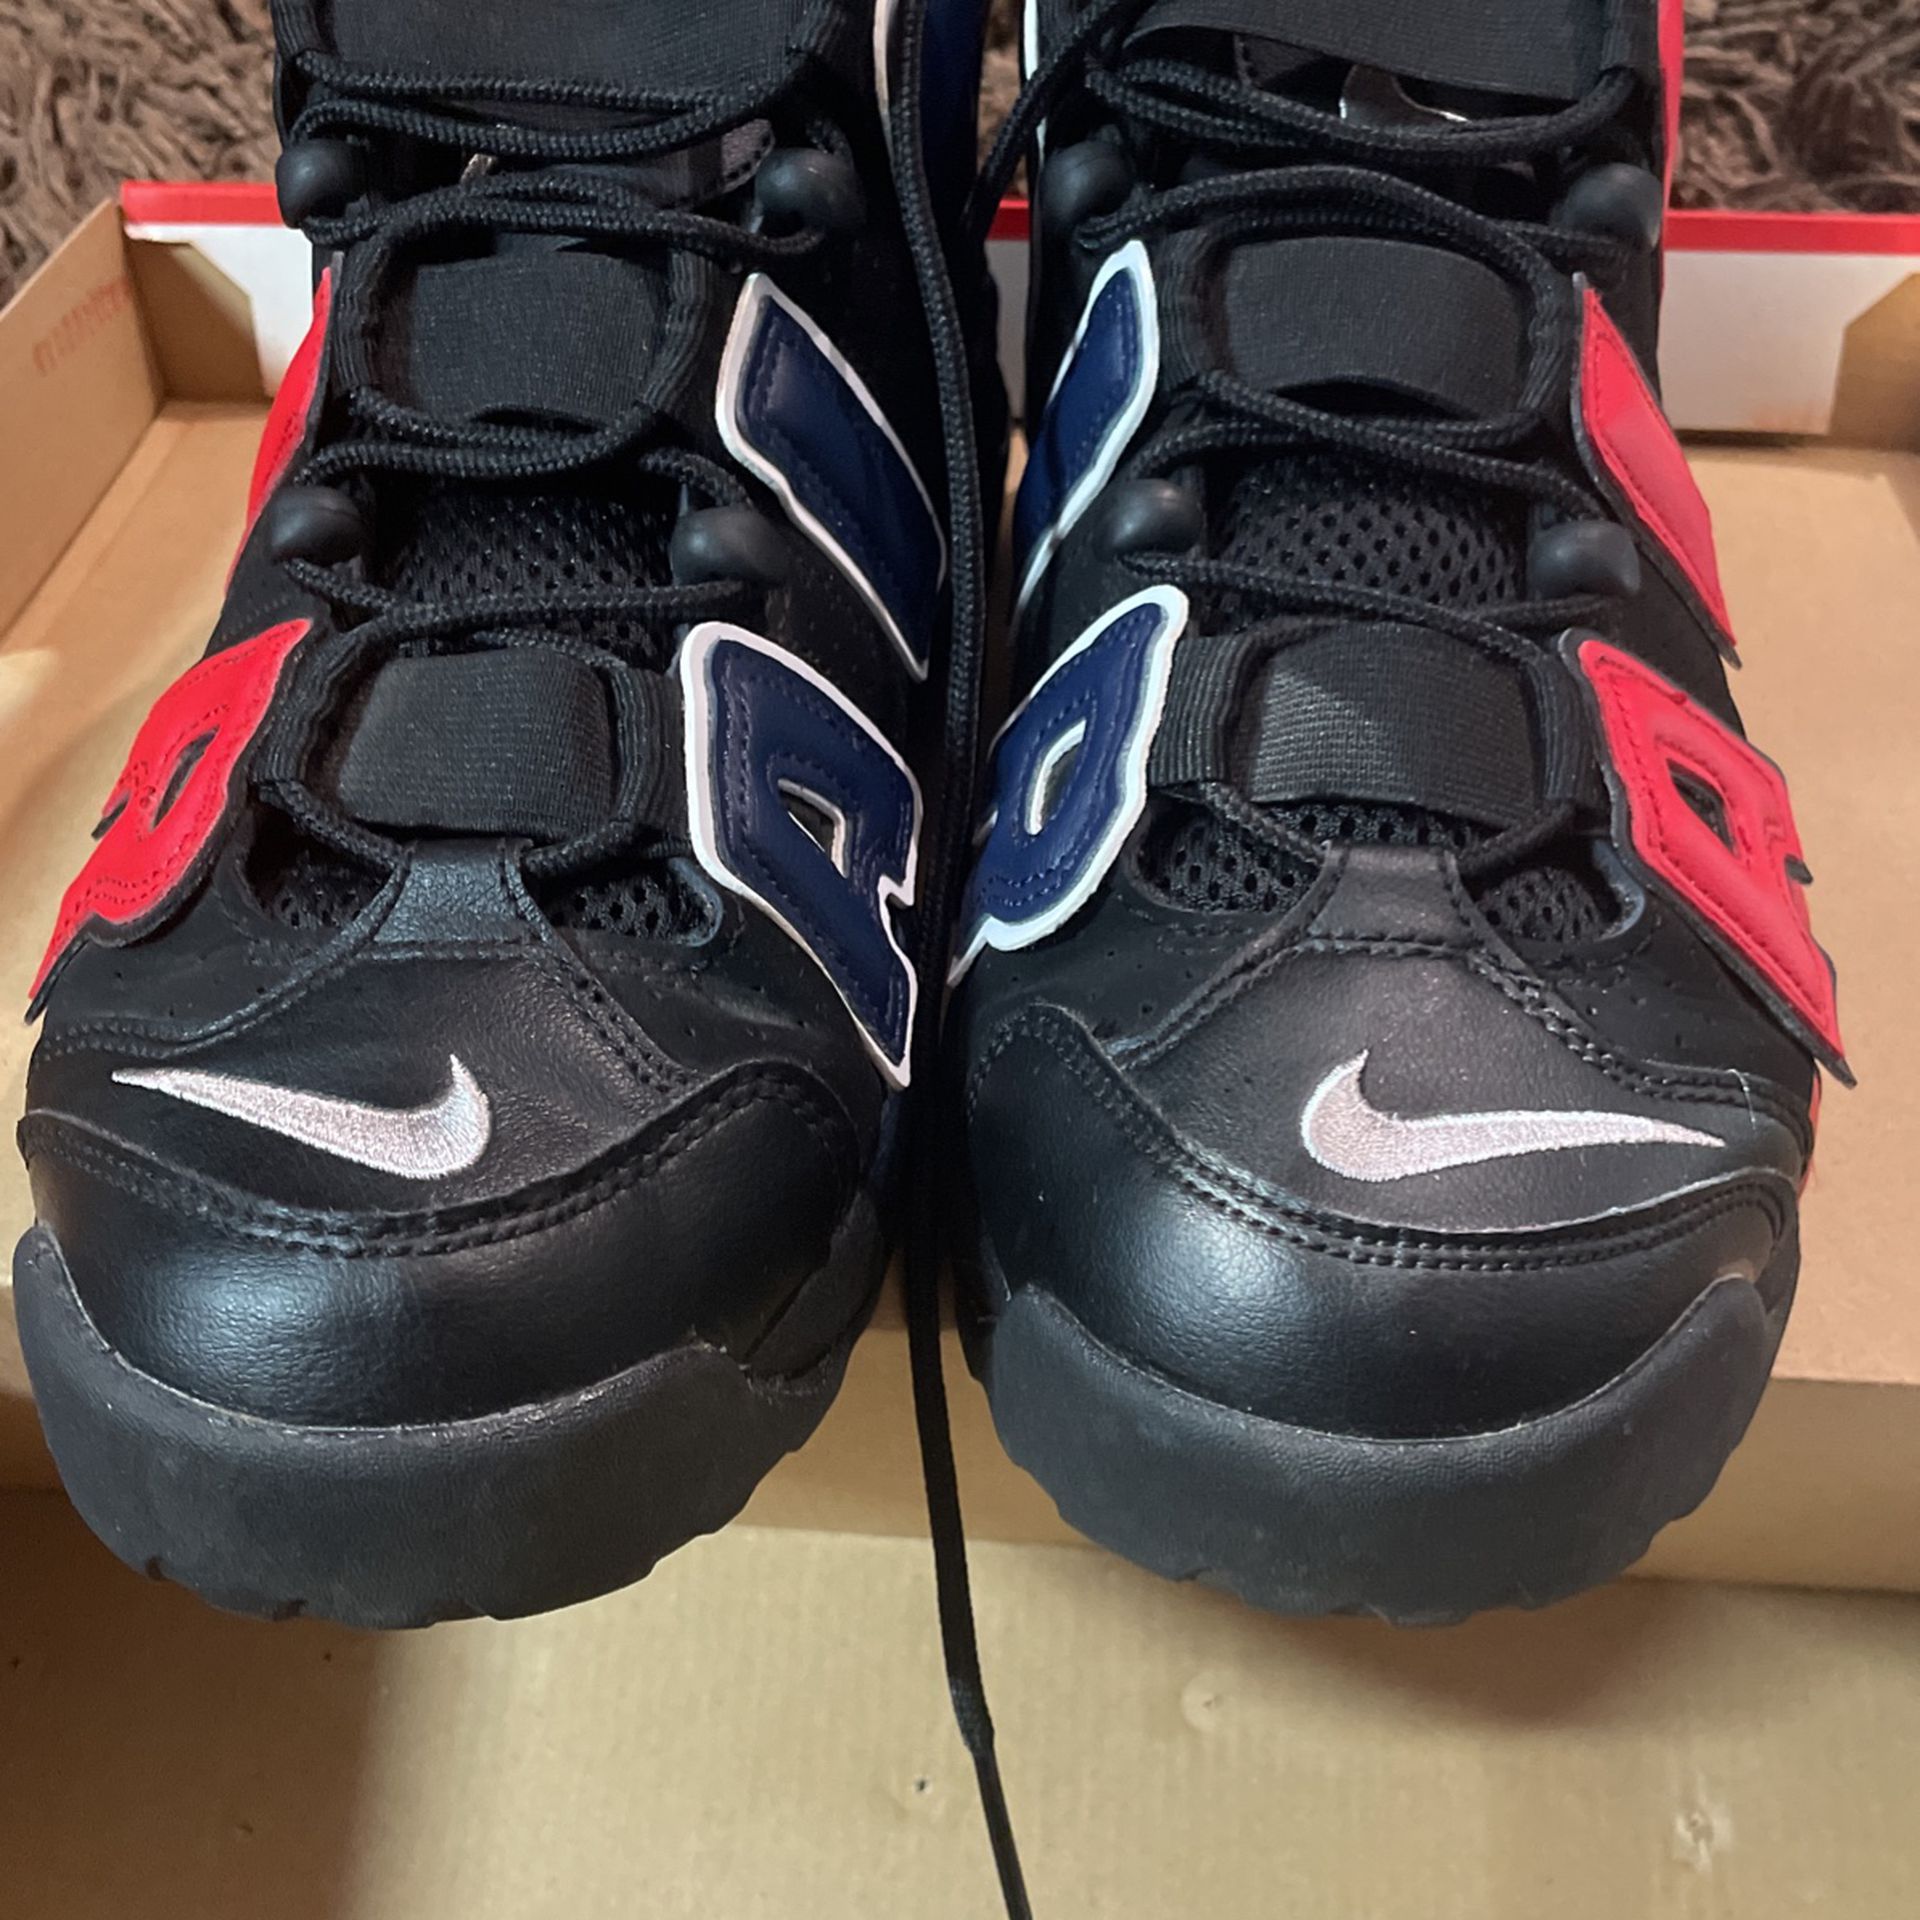 Nike Uptempo for Sale in Tigard, OR - OfferUp